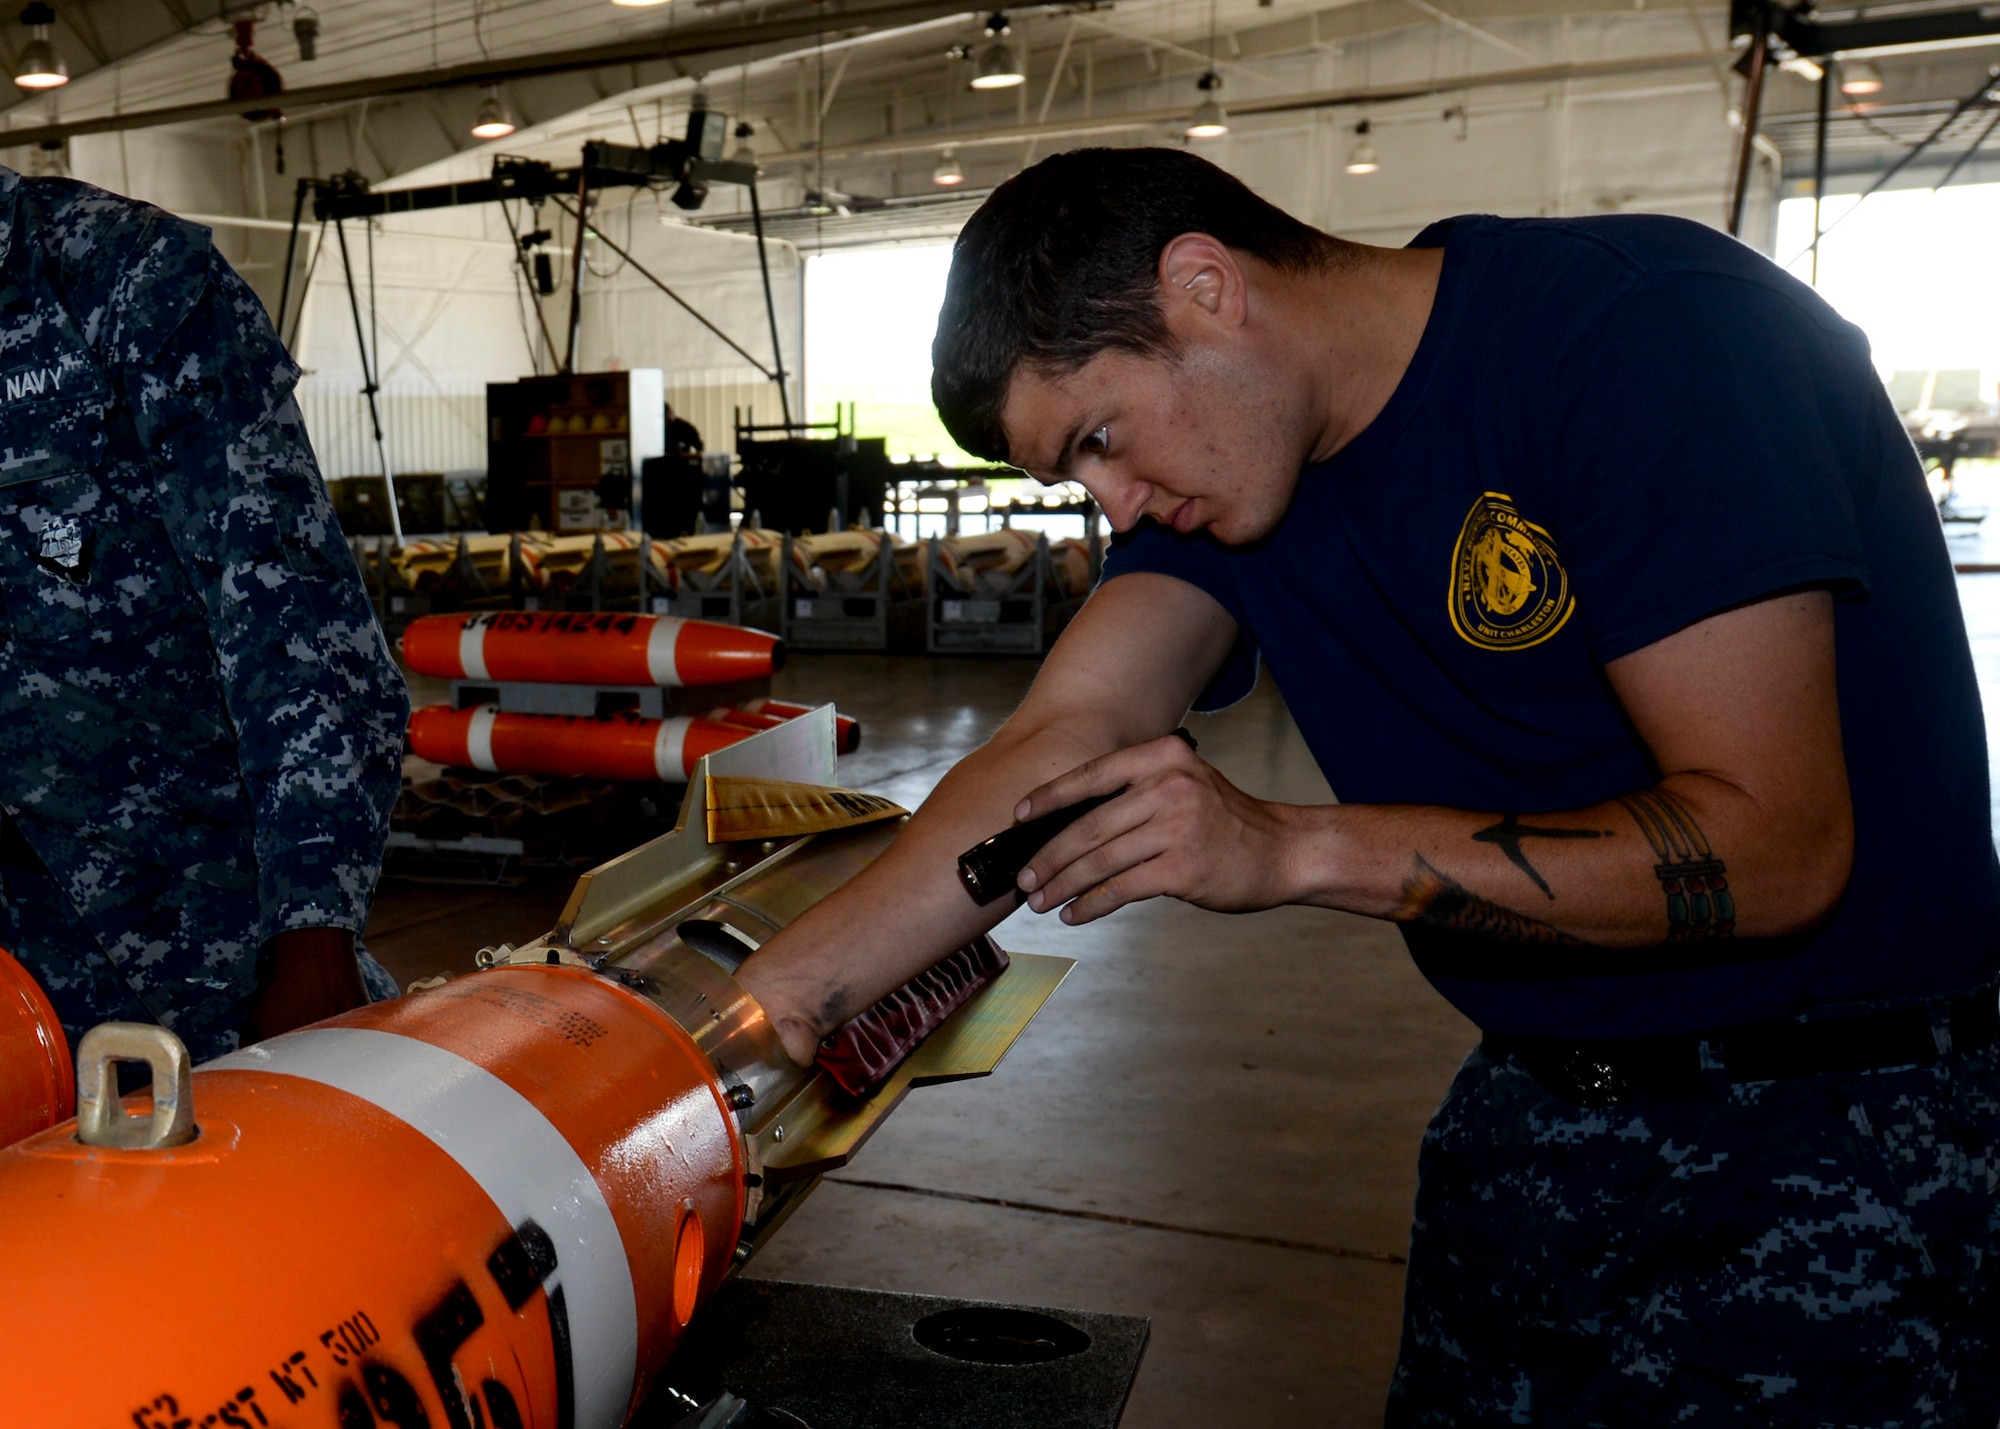 Petty Officer 2nd Class Daniel Bentley, Naval Munitions Command Charleston mineman, adjusts the fin assembly on an Mk-62 Quickstrike mine at Ellsworth Air Force Base, S.D. June 2, 2014. The B-1B Lancer pilots dropped the mines at an altitude of about 1,000 feet while moving at more than 500 kilometers an hour as part of a joint exercise with Ellsworth Airmen designed to enhance air and sea capabilities. (U.S. Air Force photo by Senior Airman Anania Tekurio/Released)